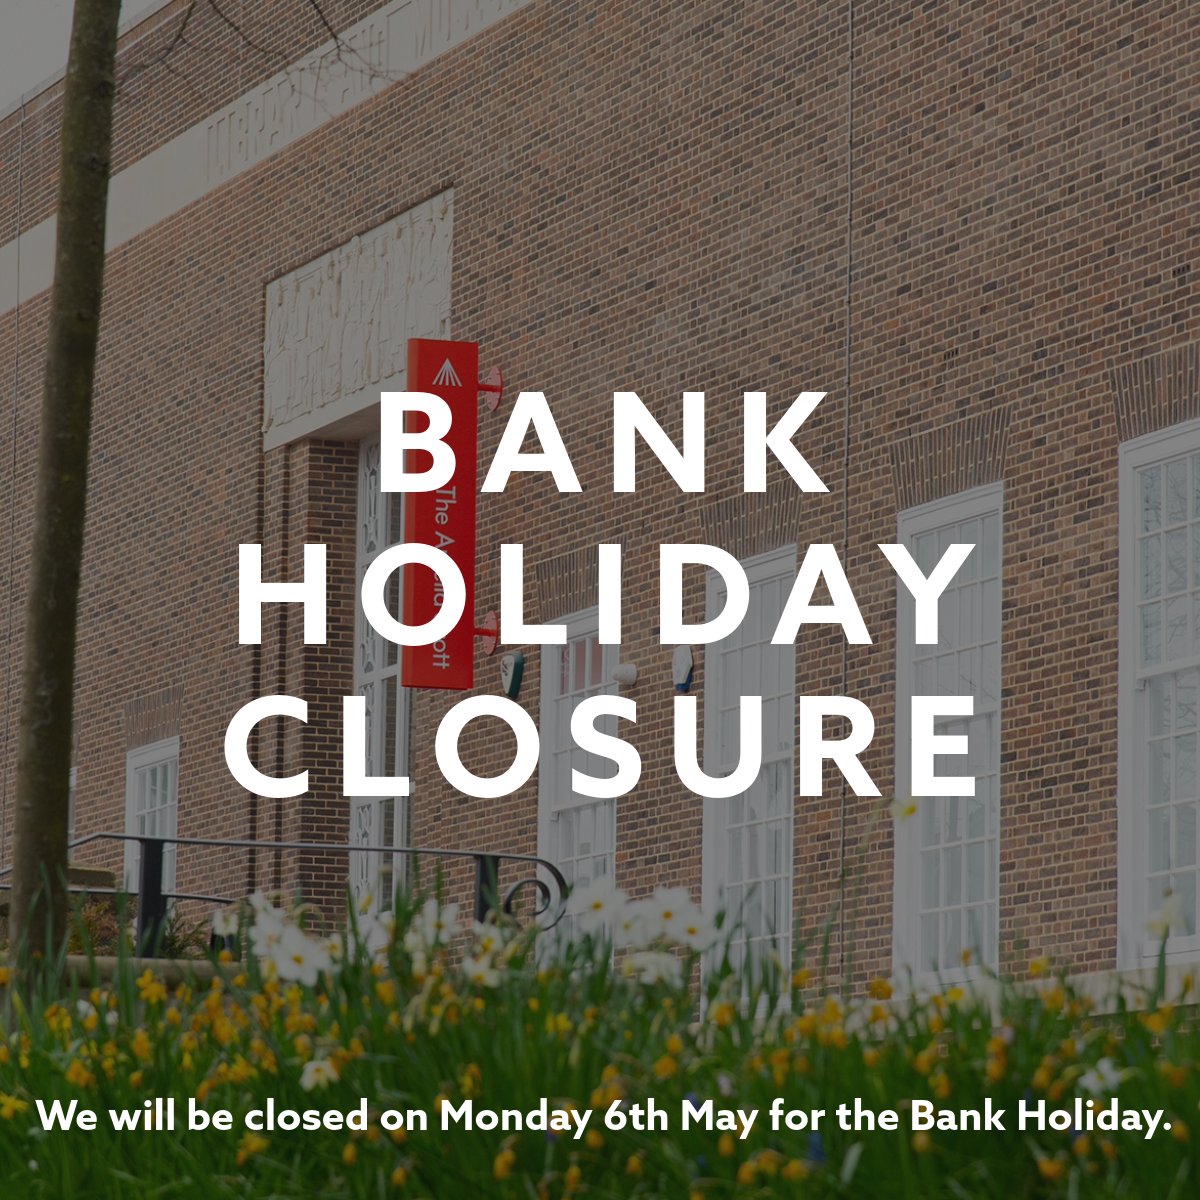 Please note, we will be closed this Monday 6th May for the Bank Holiday.